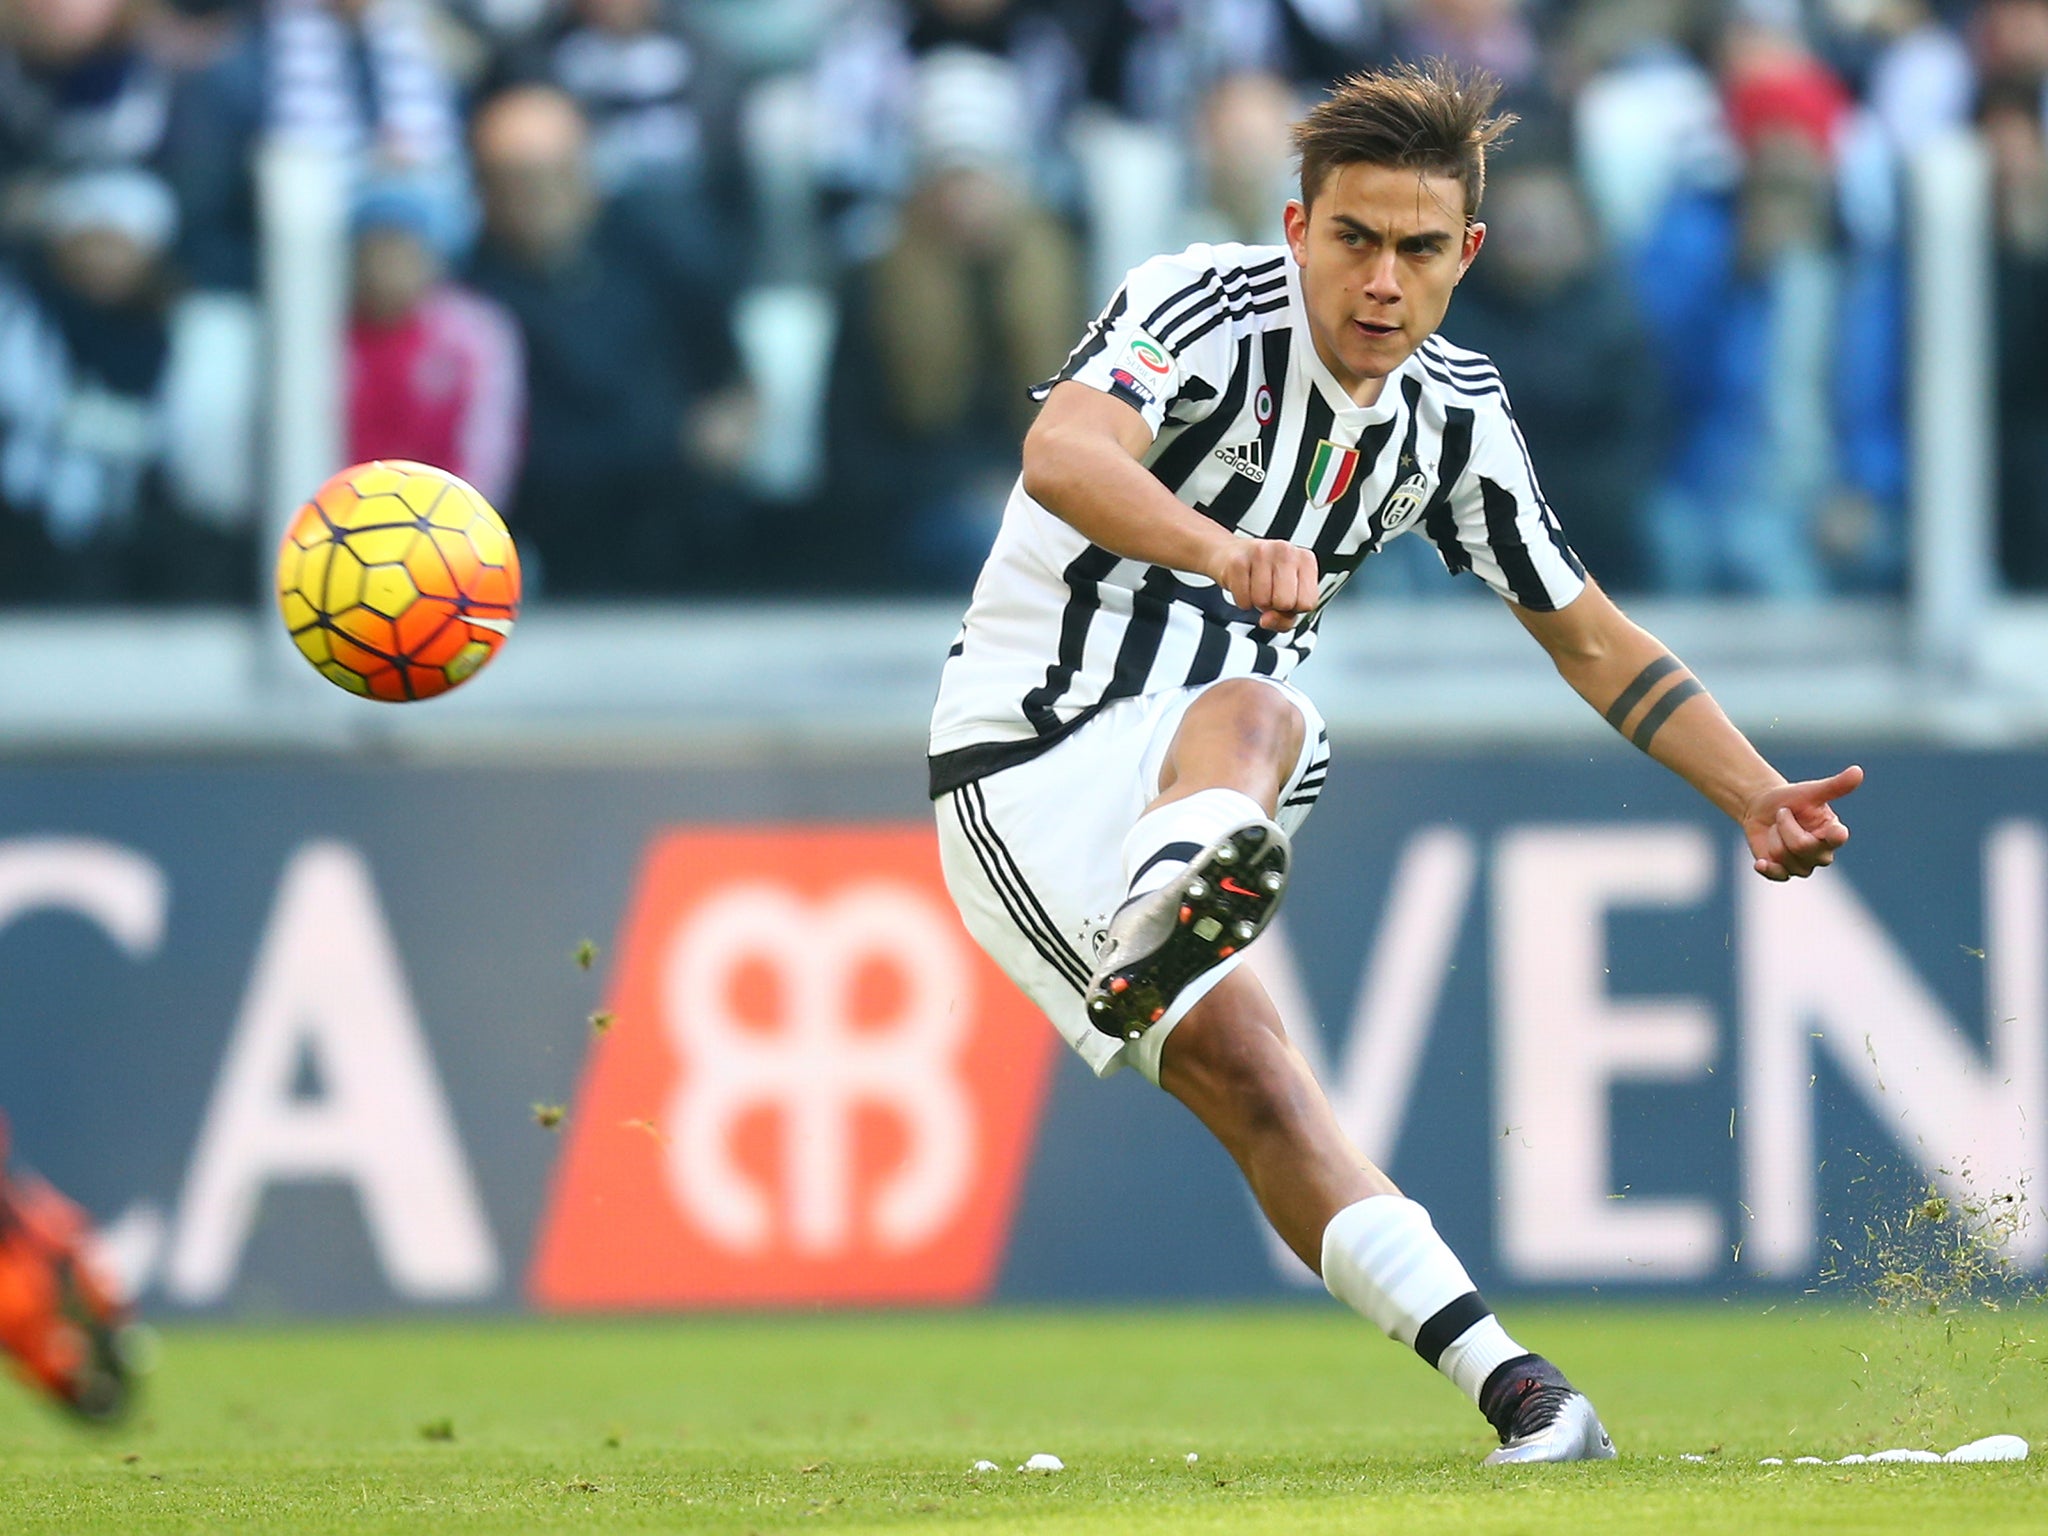 Dybala got off to a slow start but is now Juve's key man